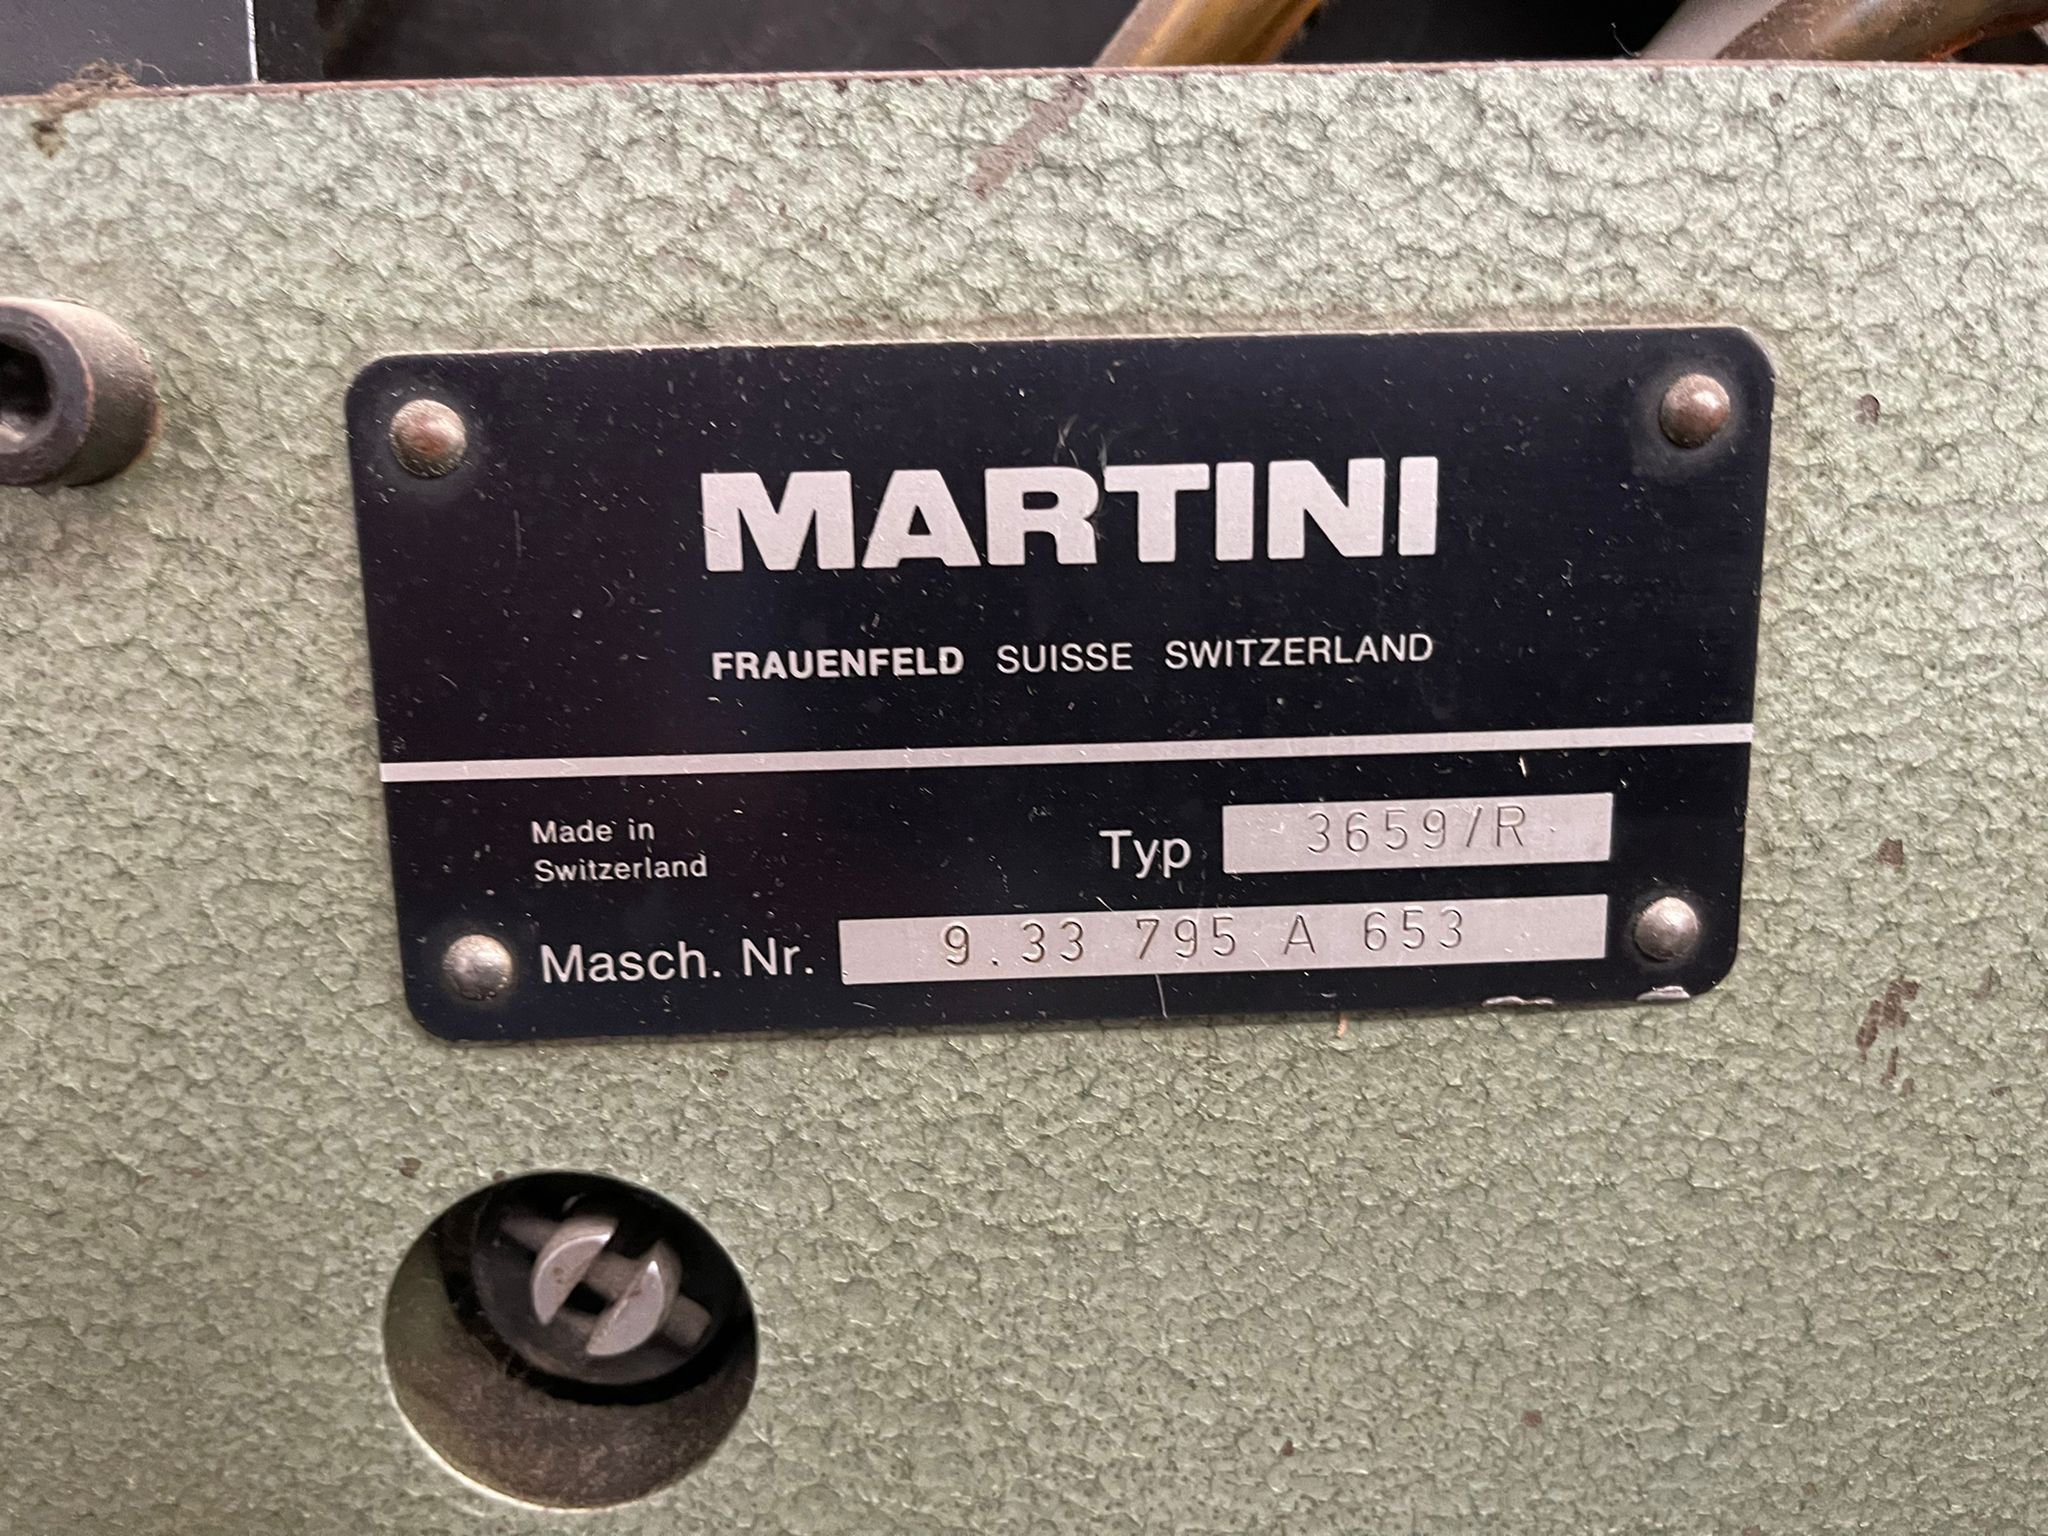 Offer 356172, a MUELLER-MARTINI 3257 from 1983